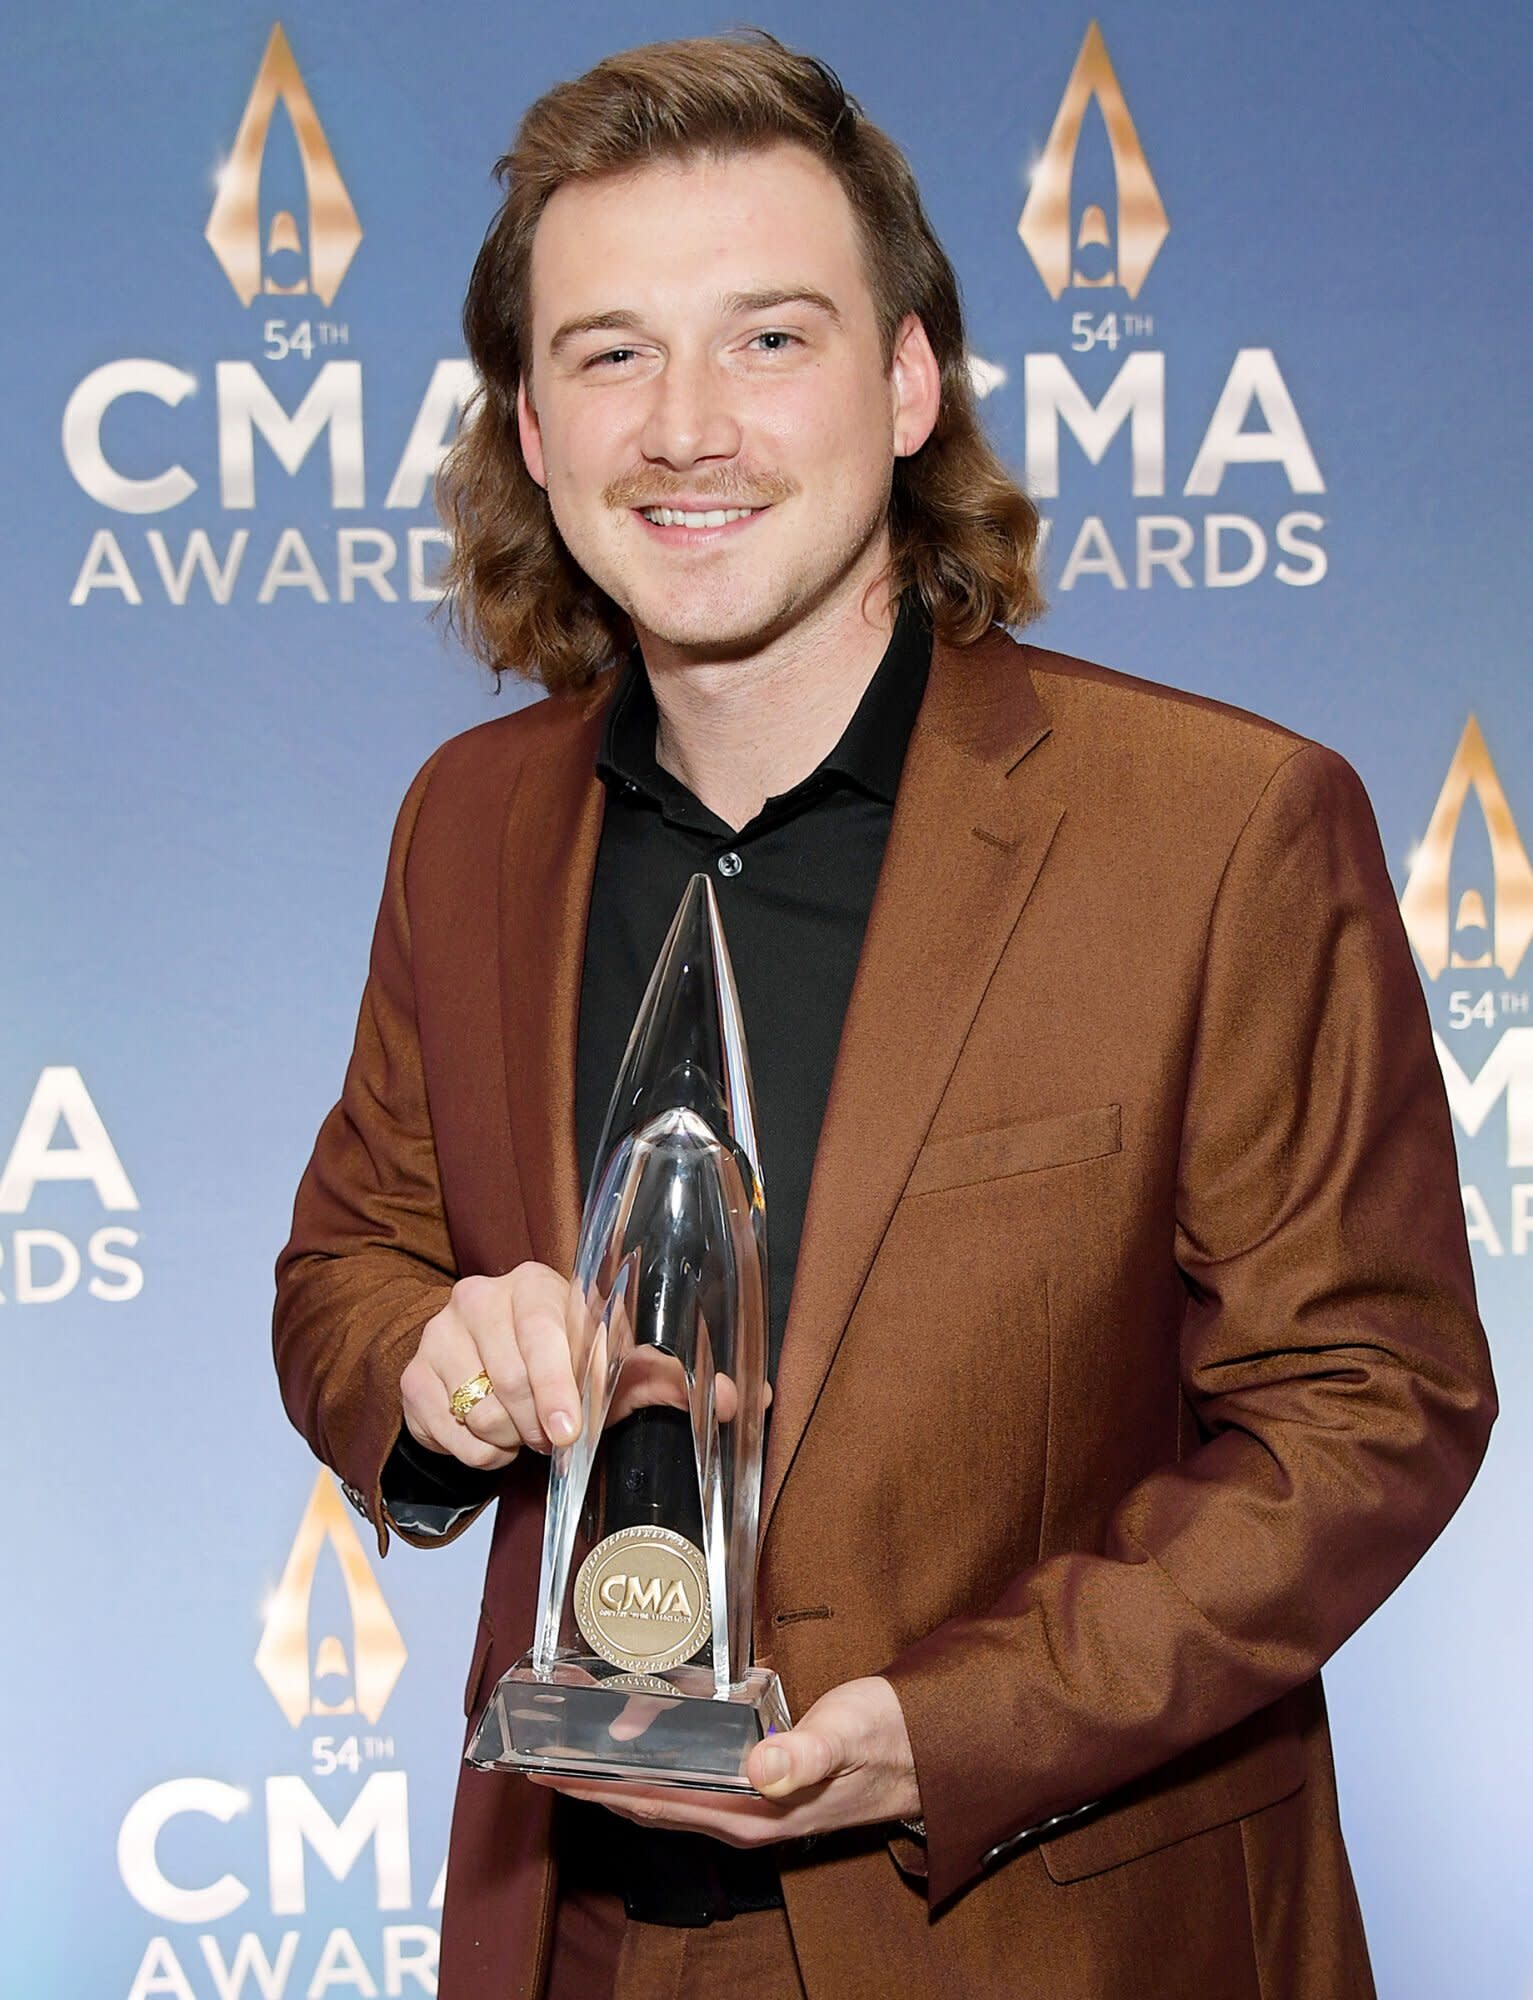 Wallen Is Ineligible for 2021 CMA Awards' Solo Categories But